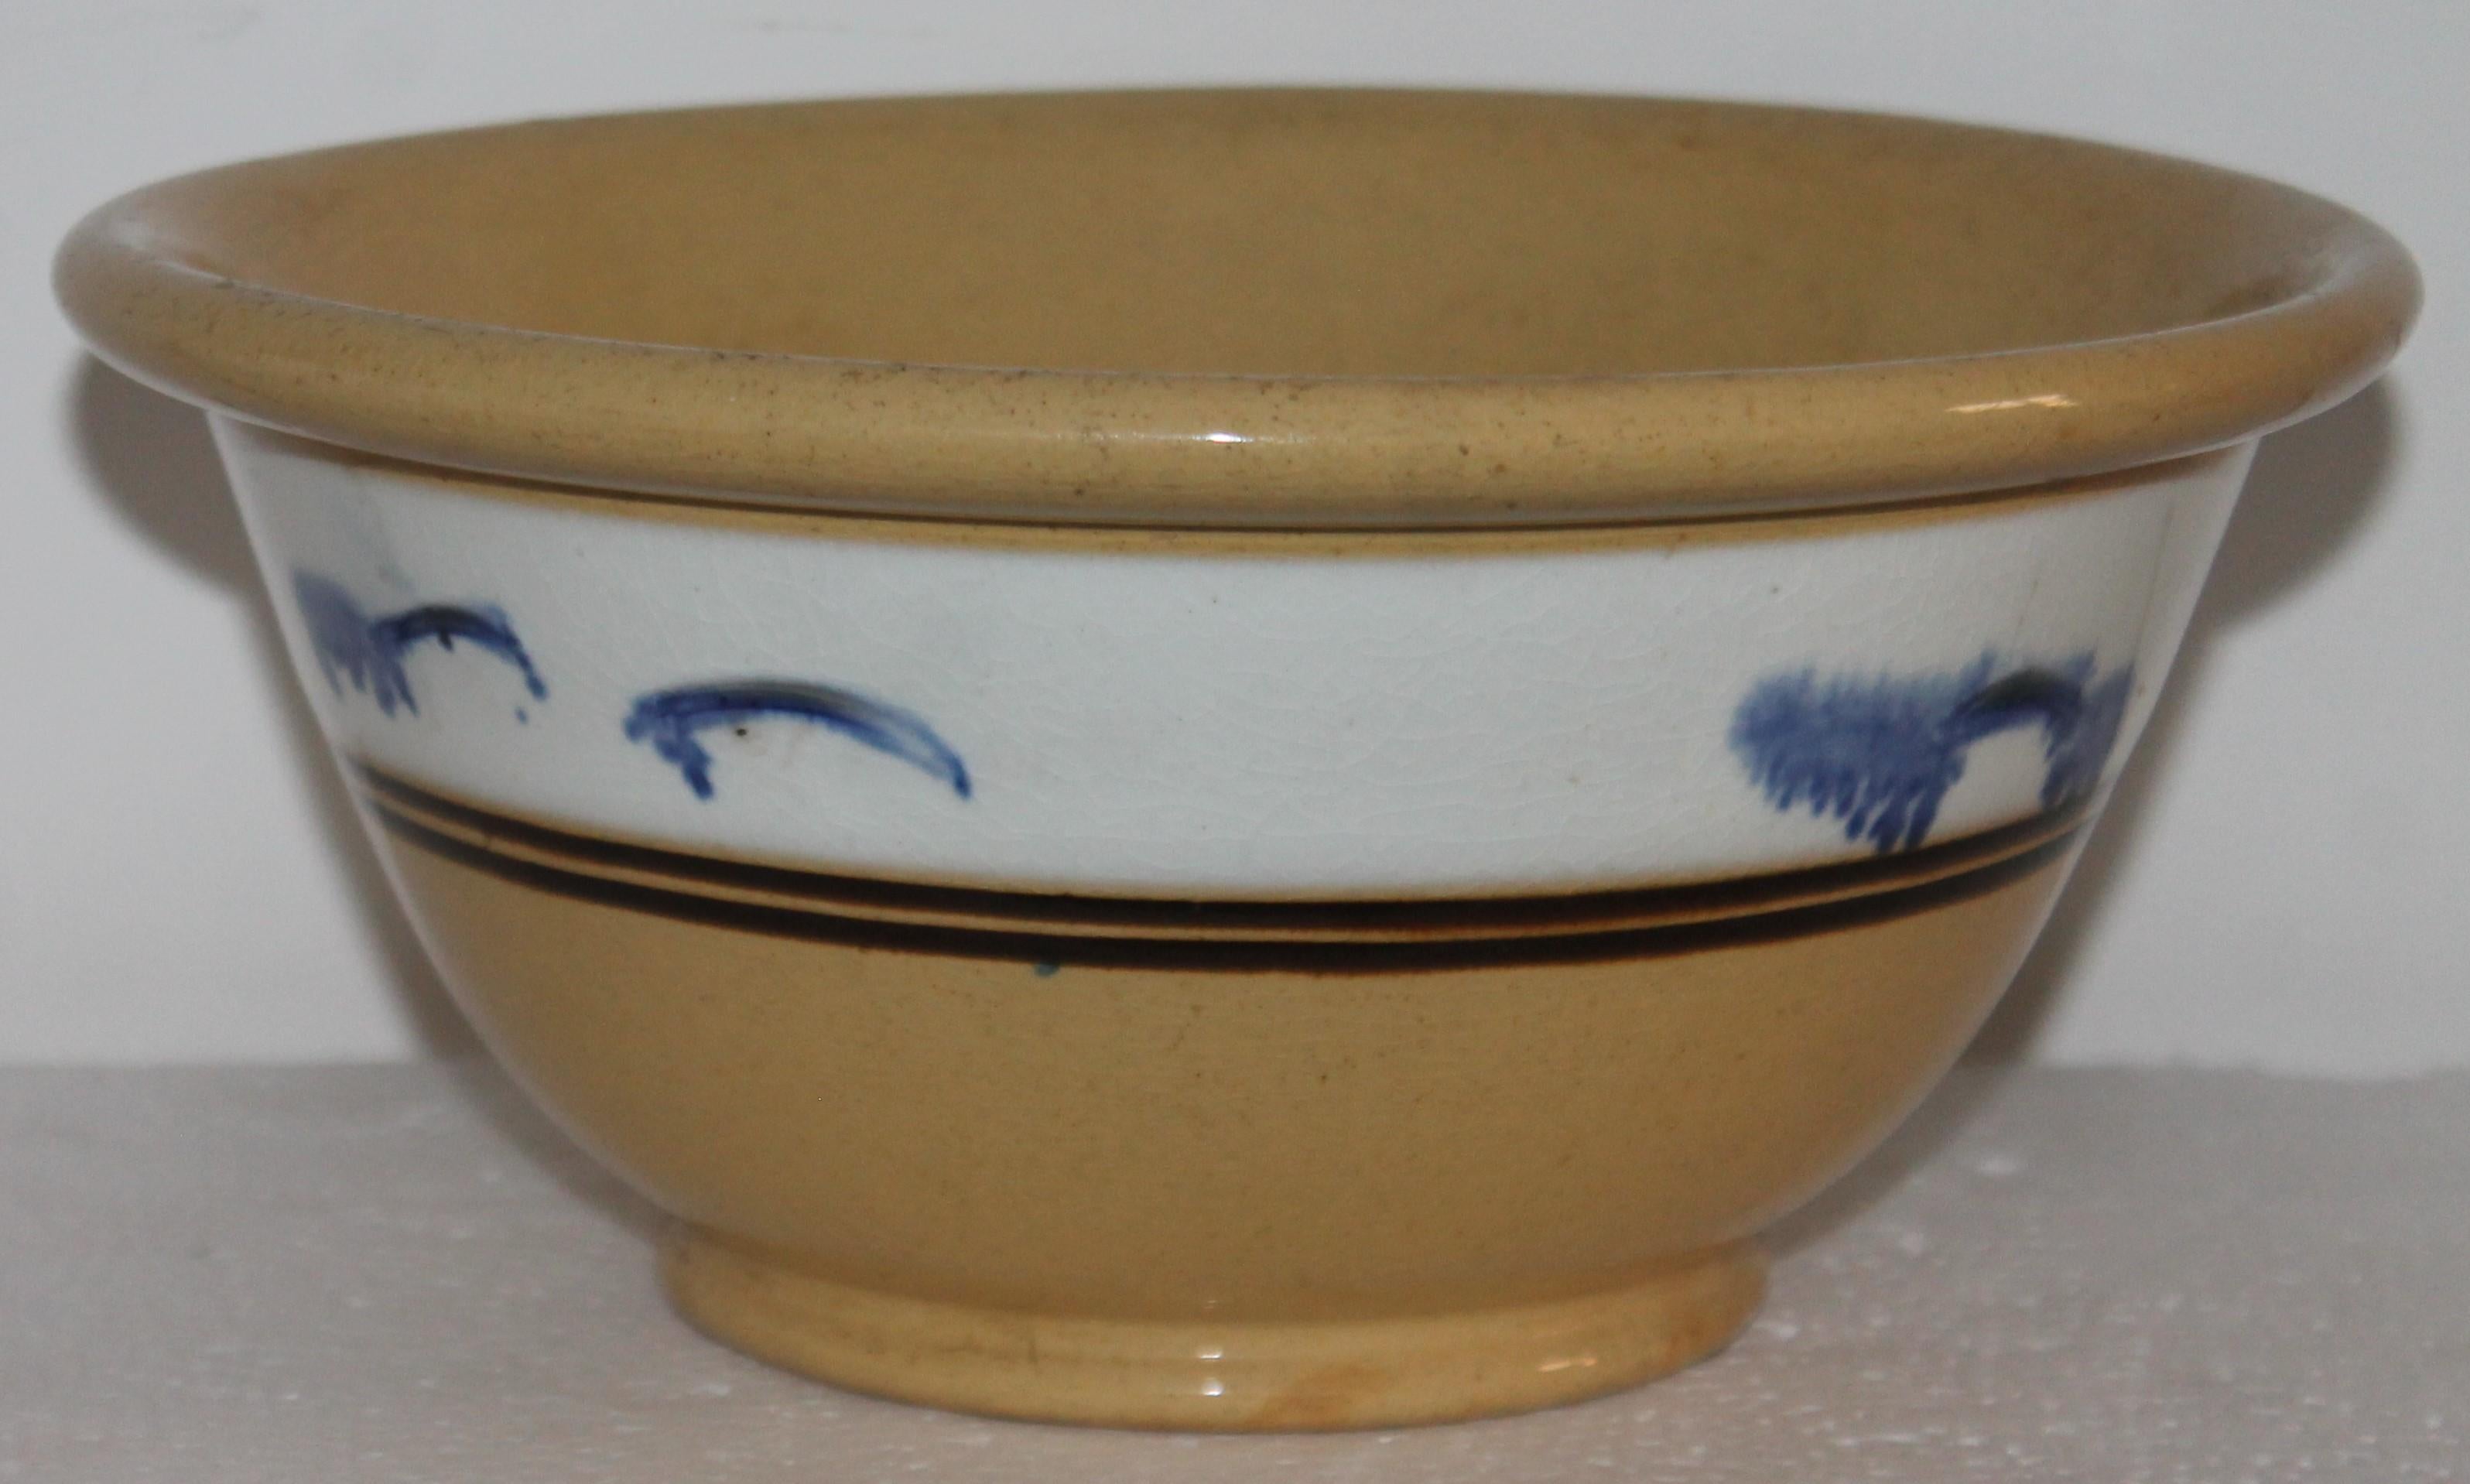 Yellow Ware Bowls - 13 For Sale on 1stDibs | antique yellow ware 